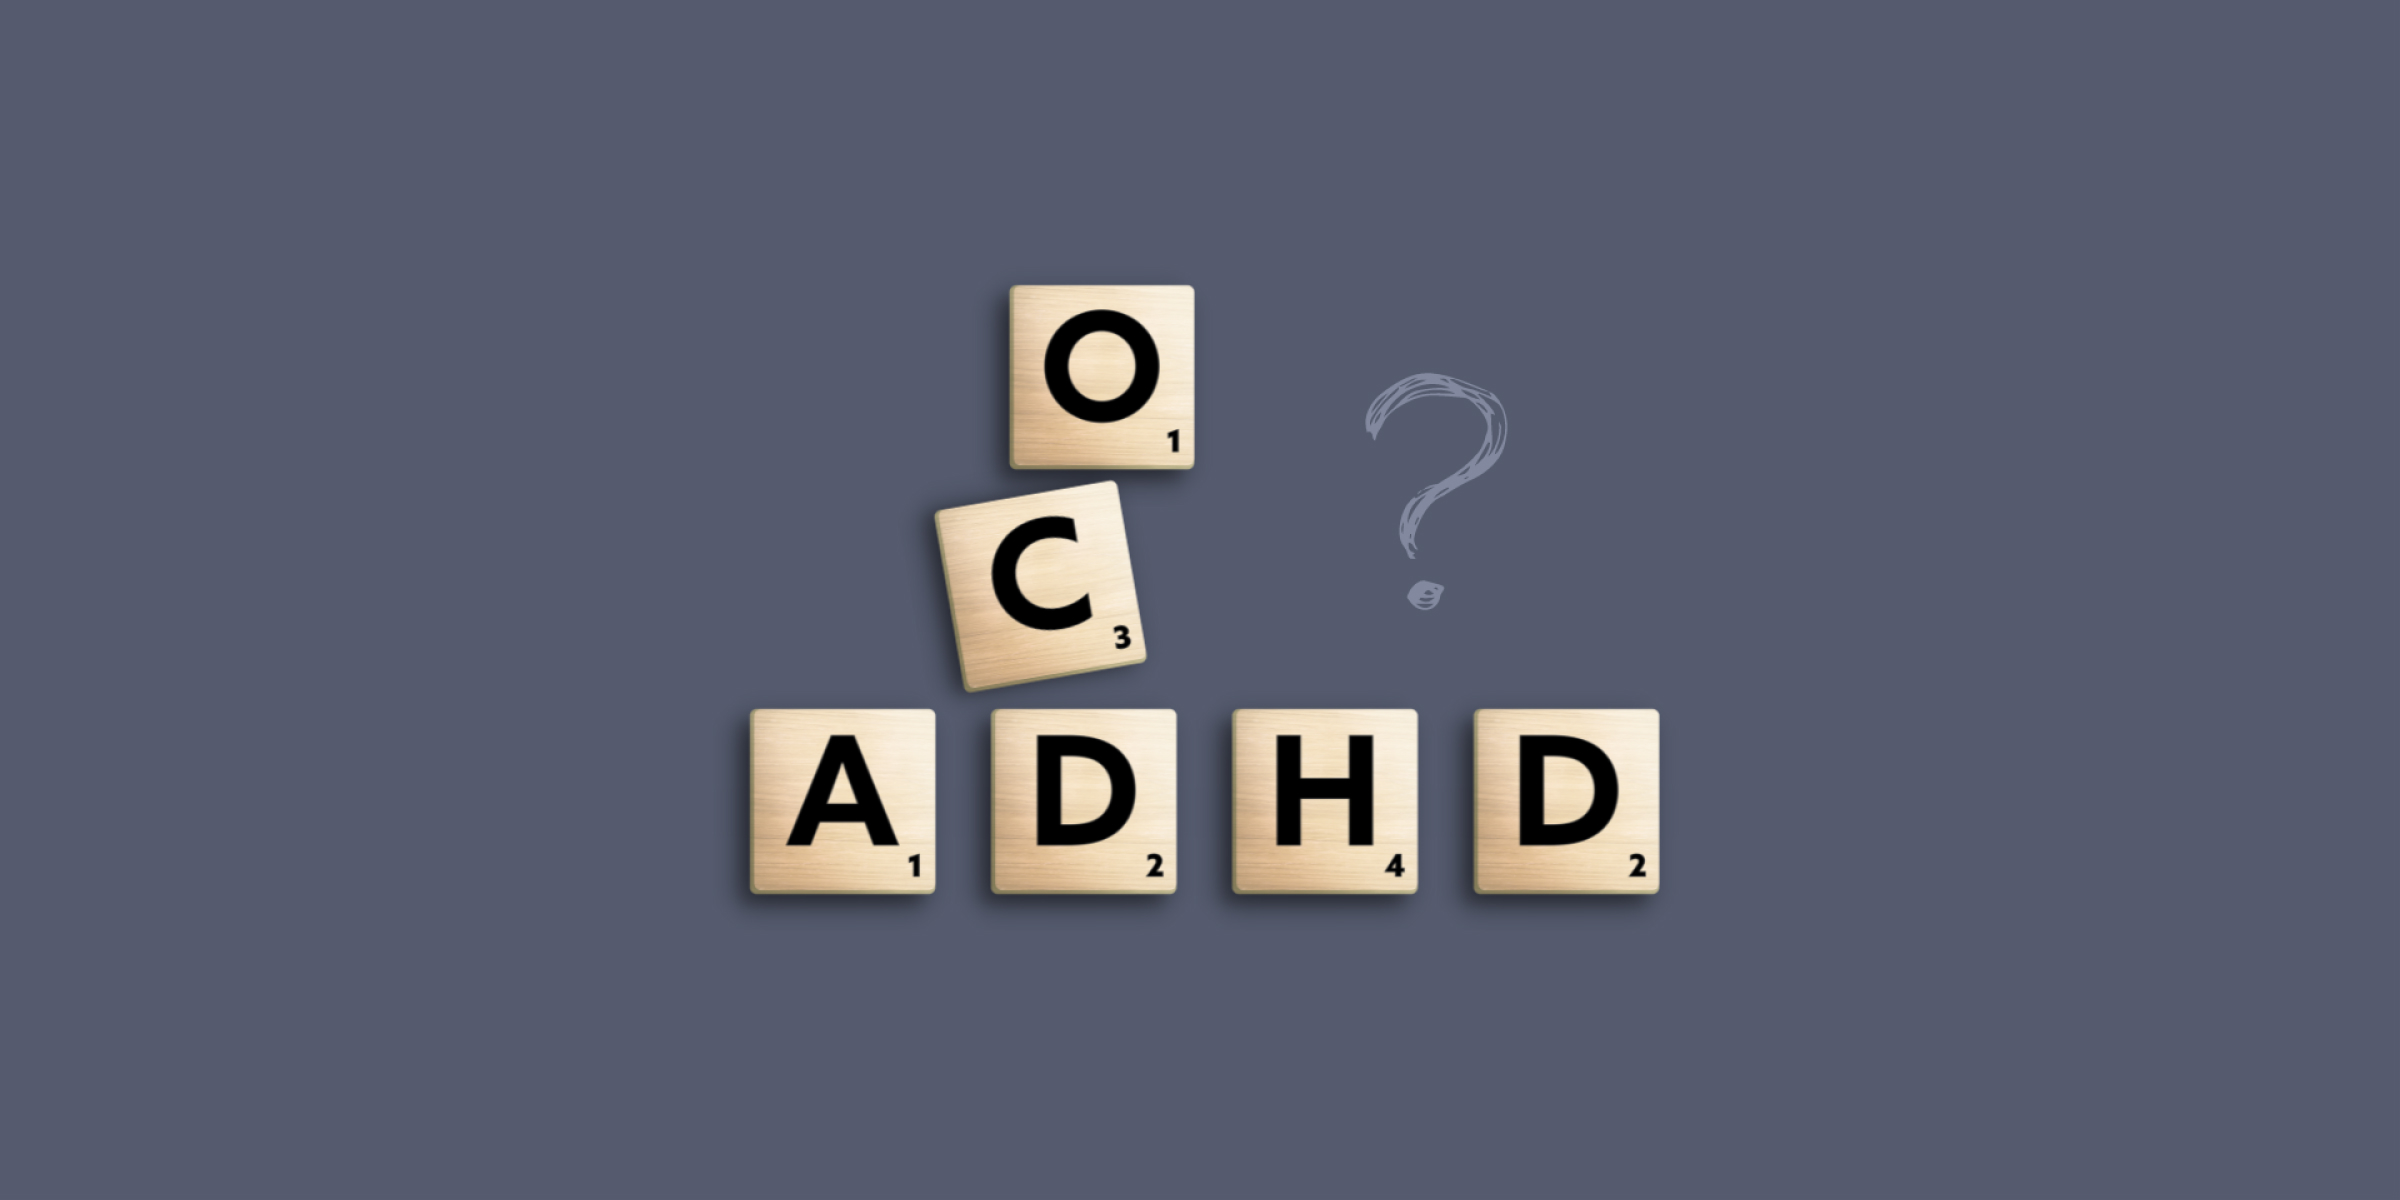 What are the main differences between ADHD and OCD?